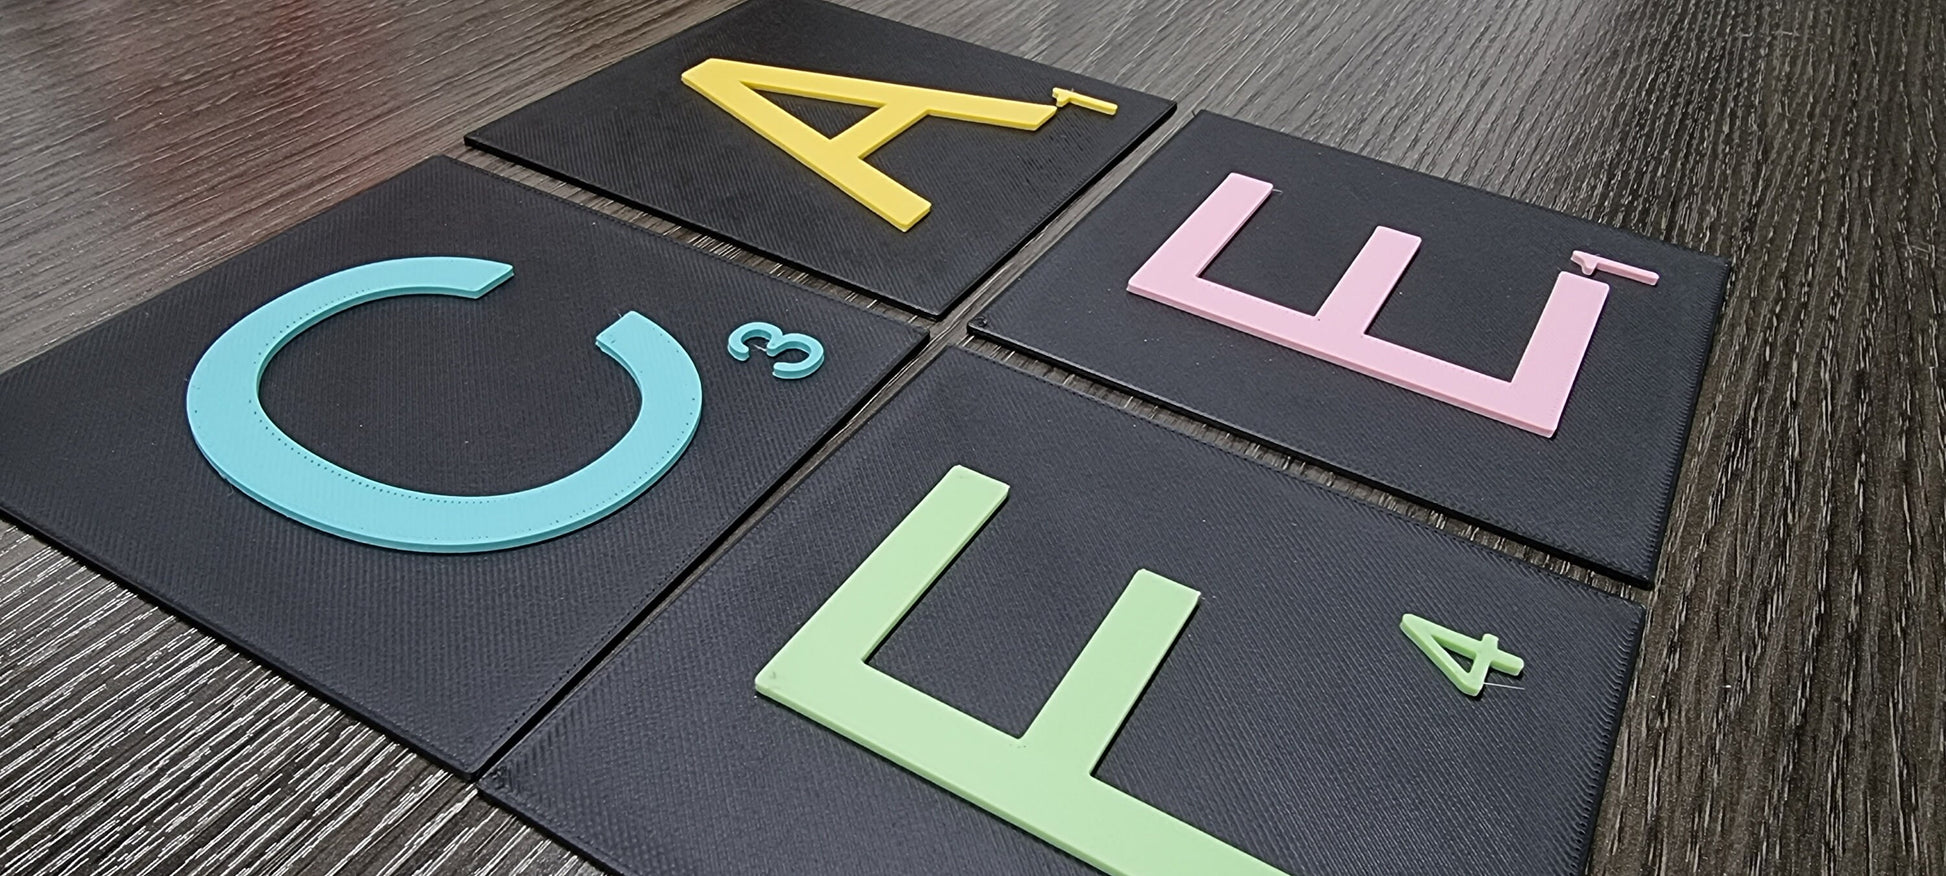 Custom Color Board Game Look Letter Tiles - 4 Inch. Modern Look Board Game Look Letter Tiles In Tons Of Colors!